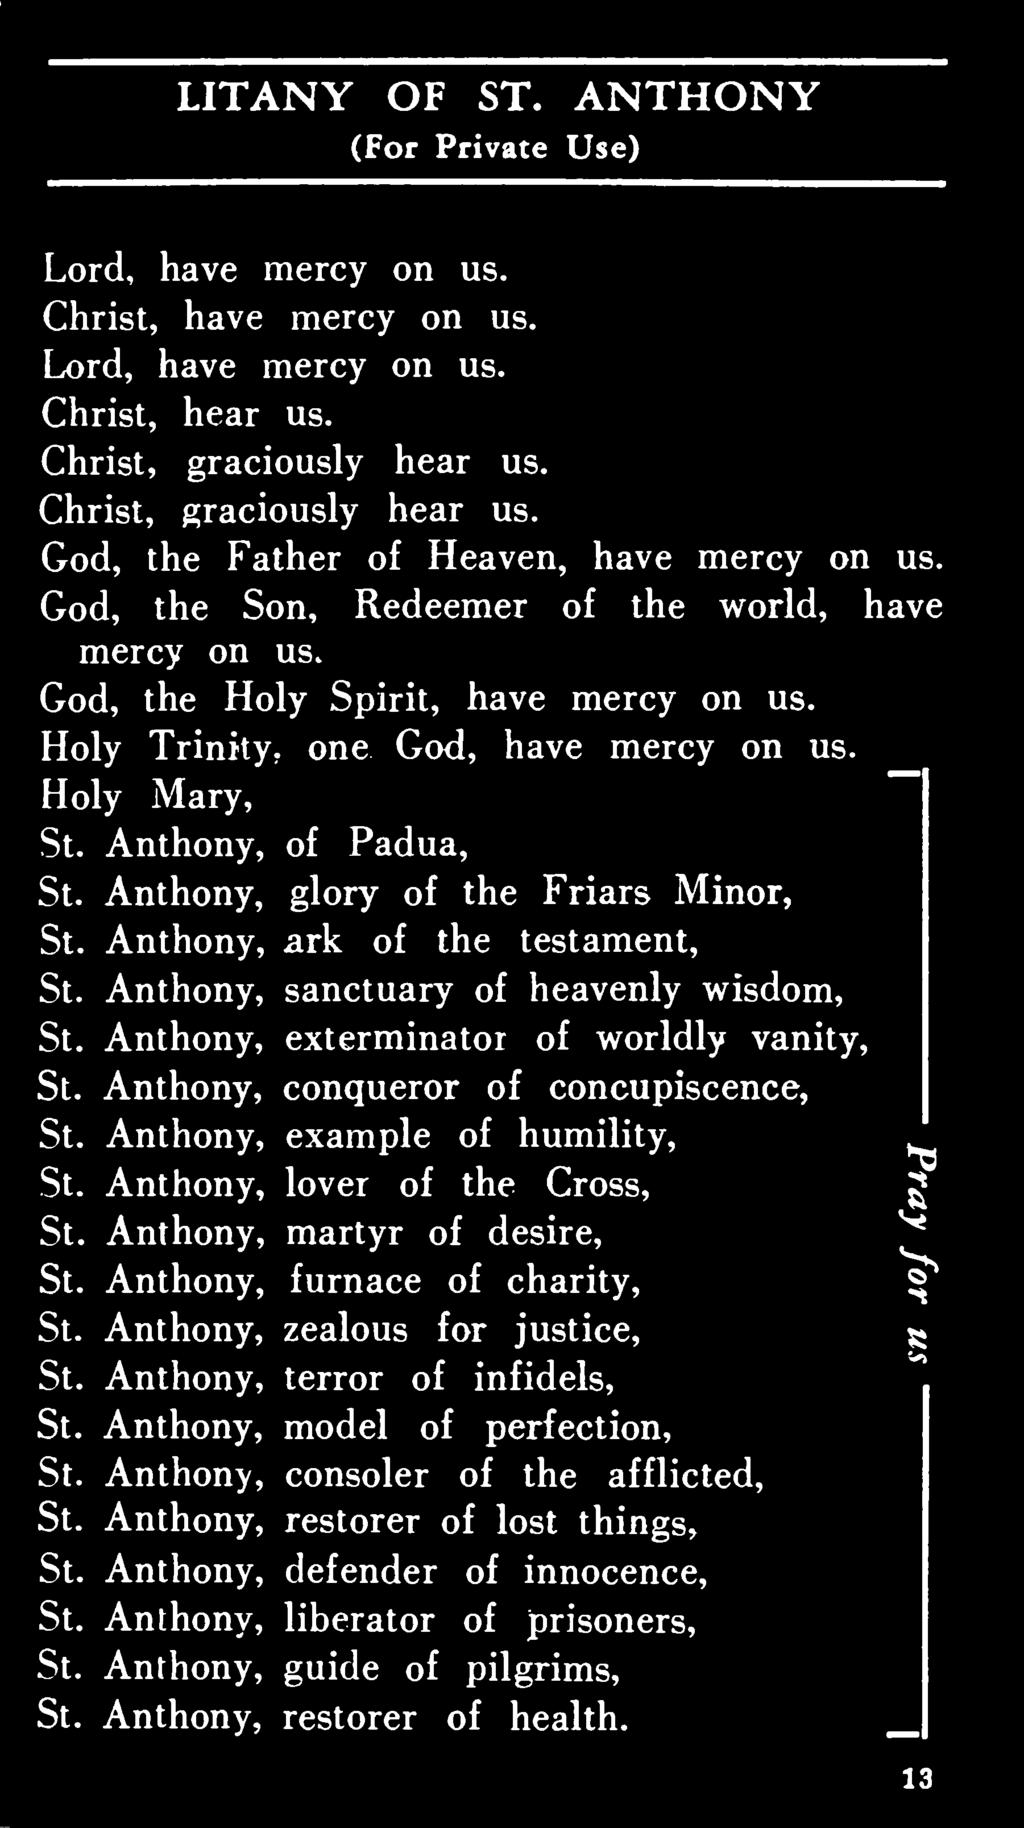 Anthony, lover of the Cross, g St. Anthony, martyr of desire, ^ St. Anthony, furnace of charity, St. Anthony, zealous for justice, g St. Anthony, terror of infidels, St.